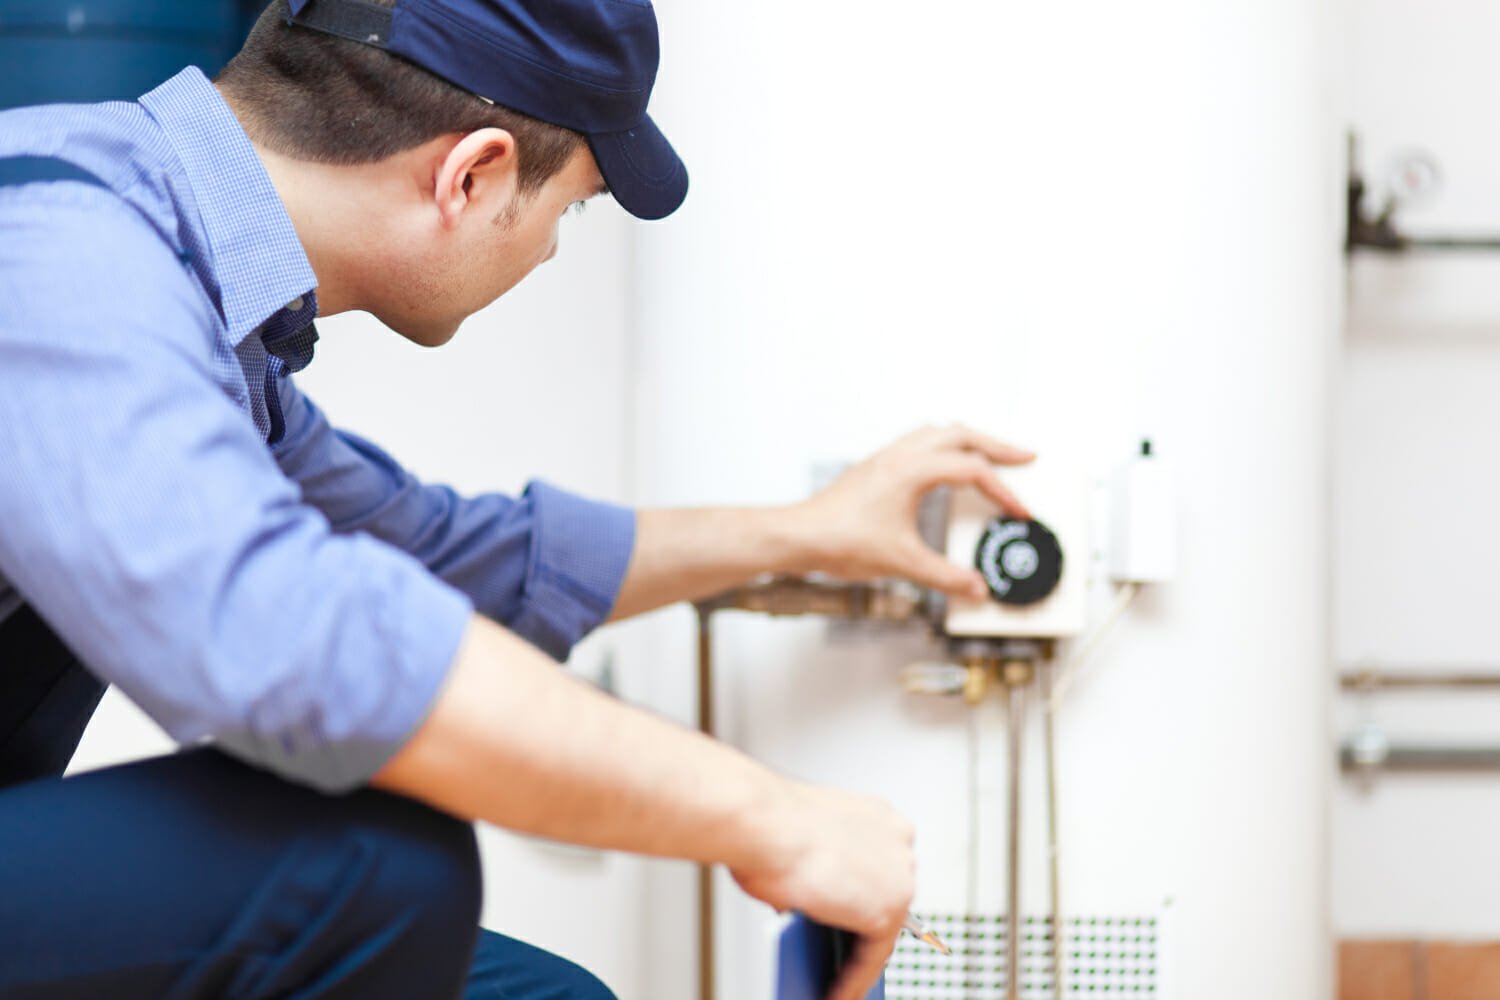 A skilled plumbing technician, ready to provide professional water heater maintenance services to extend the life and energy efficiency of your unit